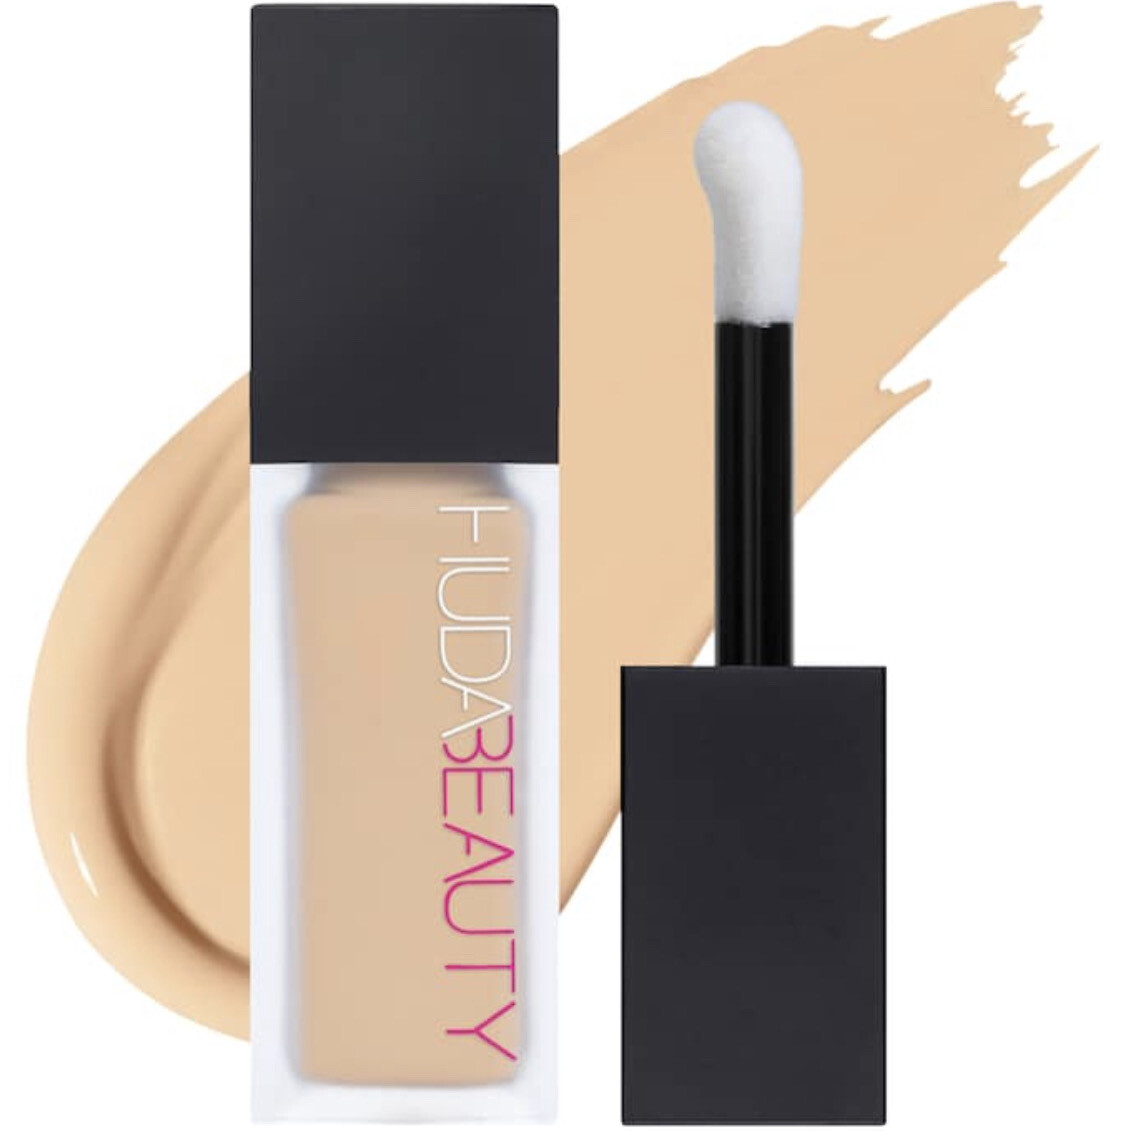 Huda Beauty - #FauxFilter Luminous Matte Buildable Coverage Crease Proof Concealer | Cotton Candy 2.3 Beige - light skin tones with pink undertones